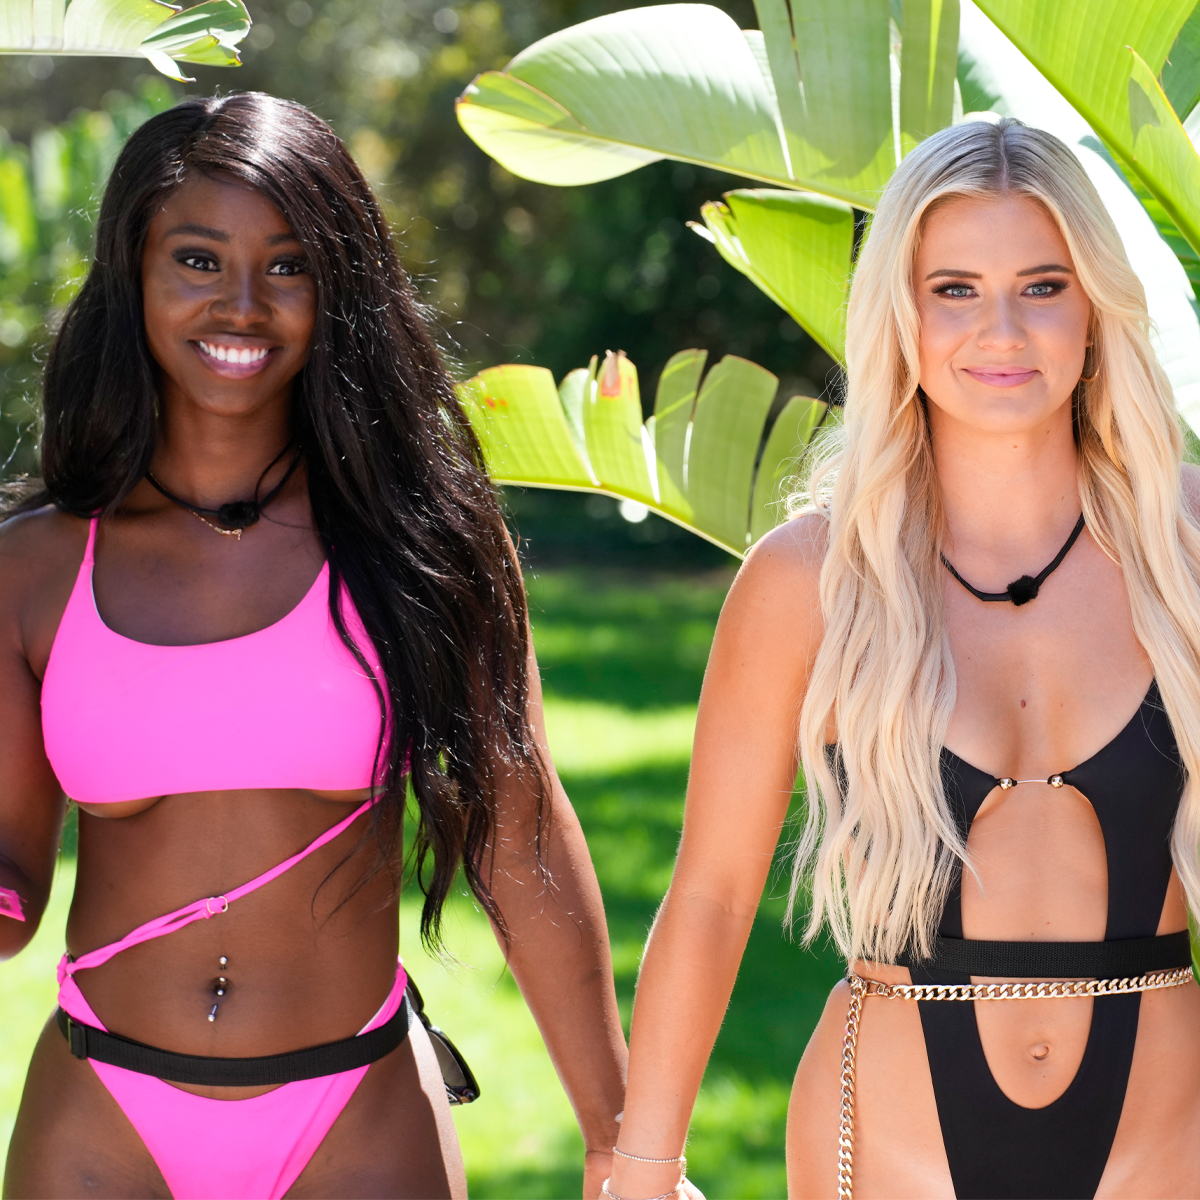 Love Island: Be a Villa Bombshell With Swimwear From the Show